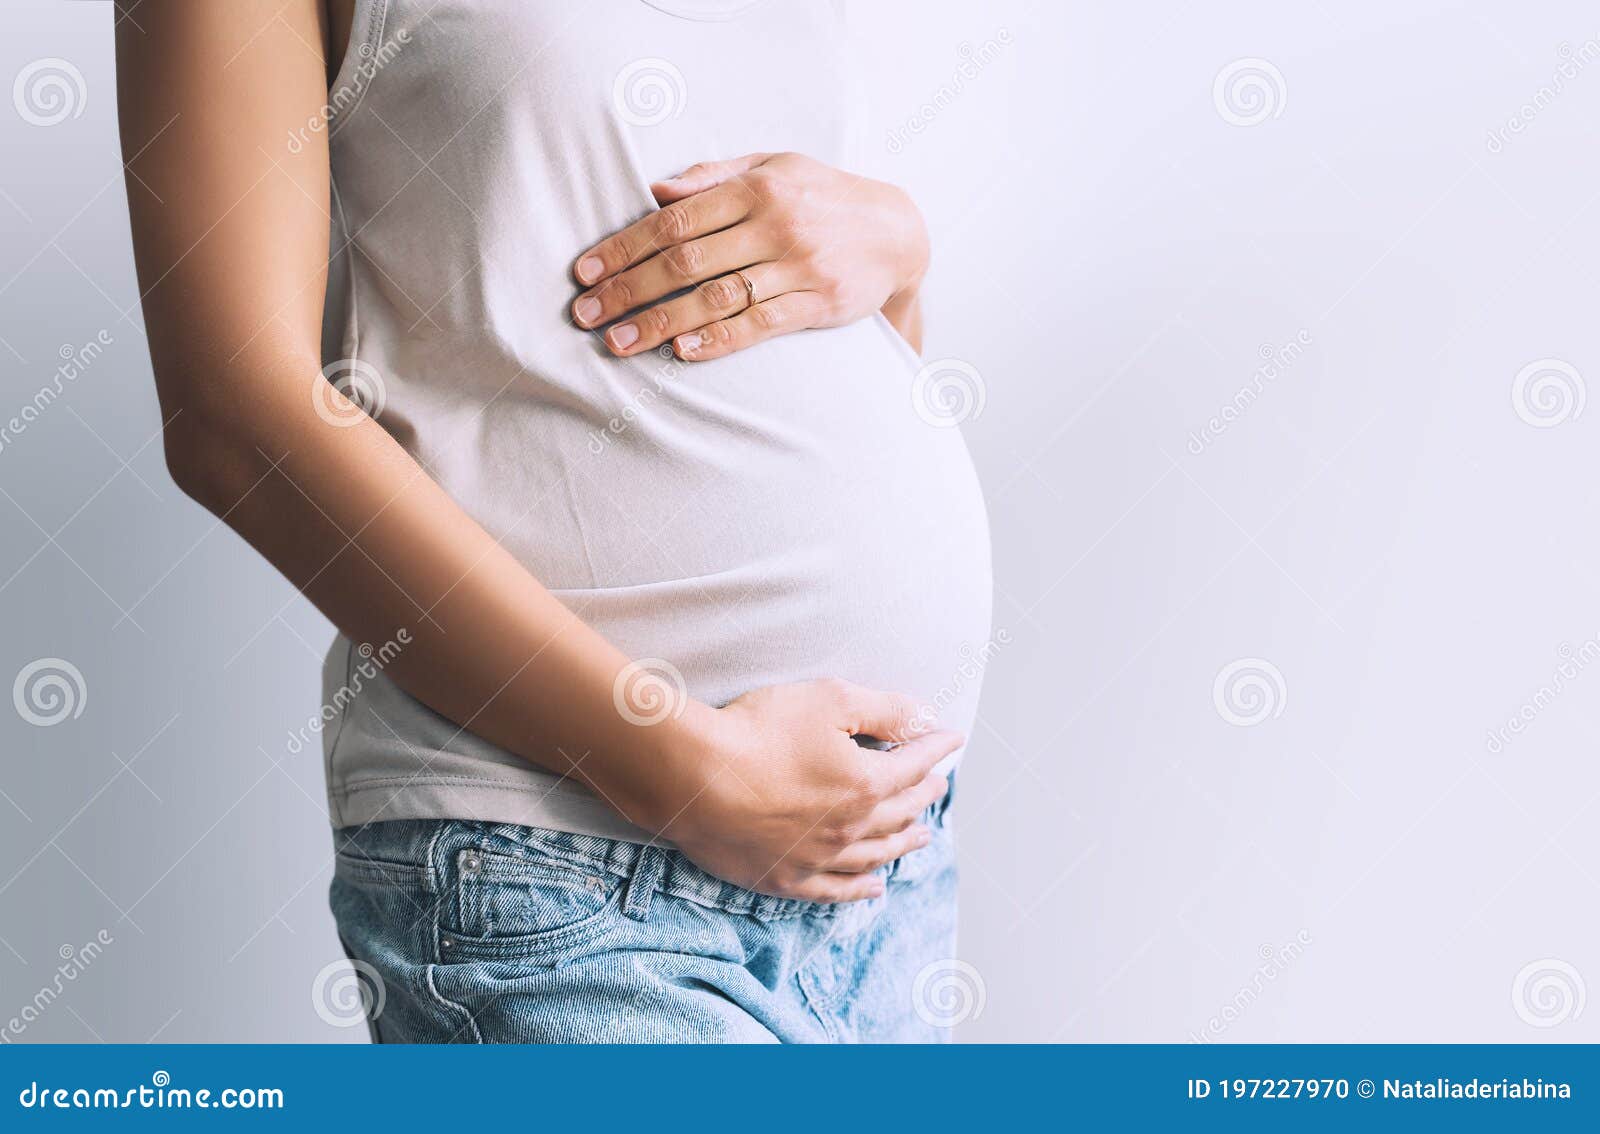 Pregnant Woman Holds Hands On Belly Photo Of Pregnancy Stock Photo